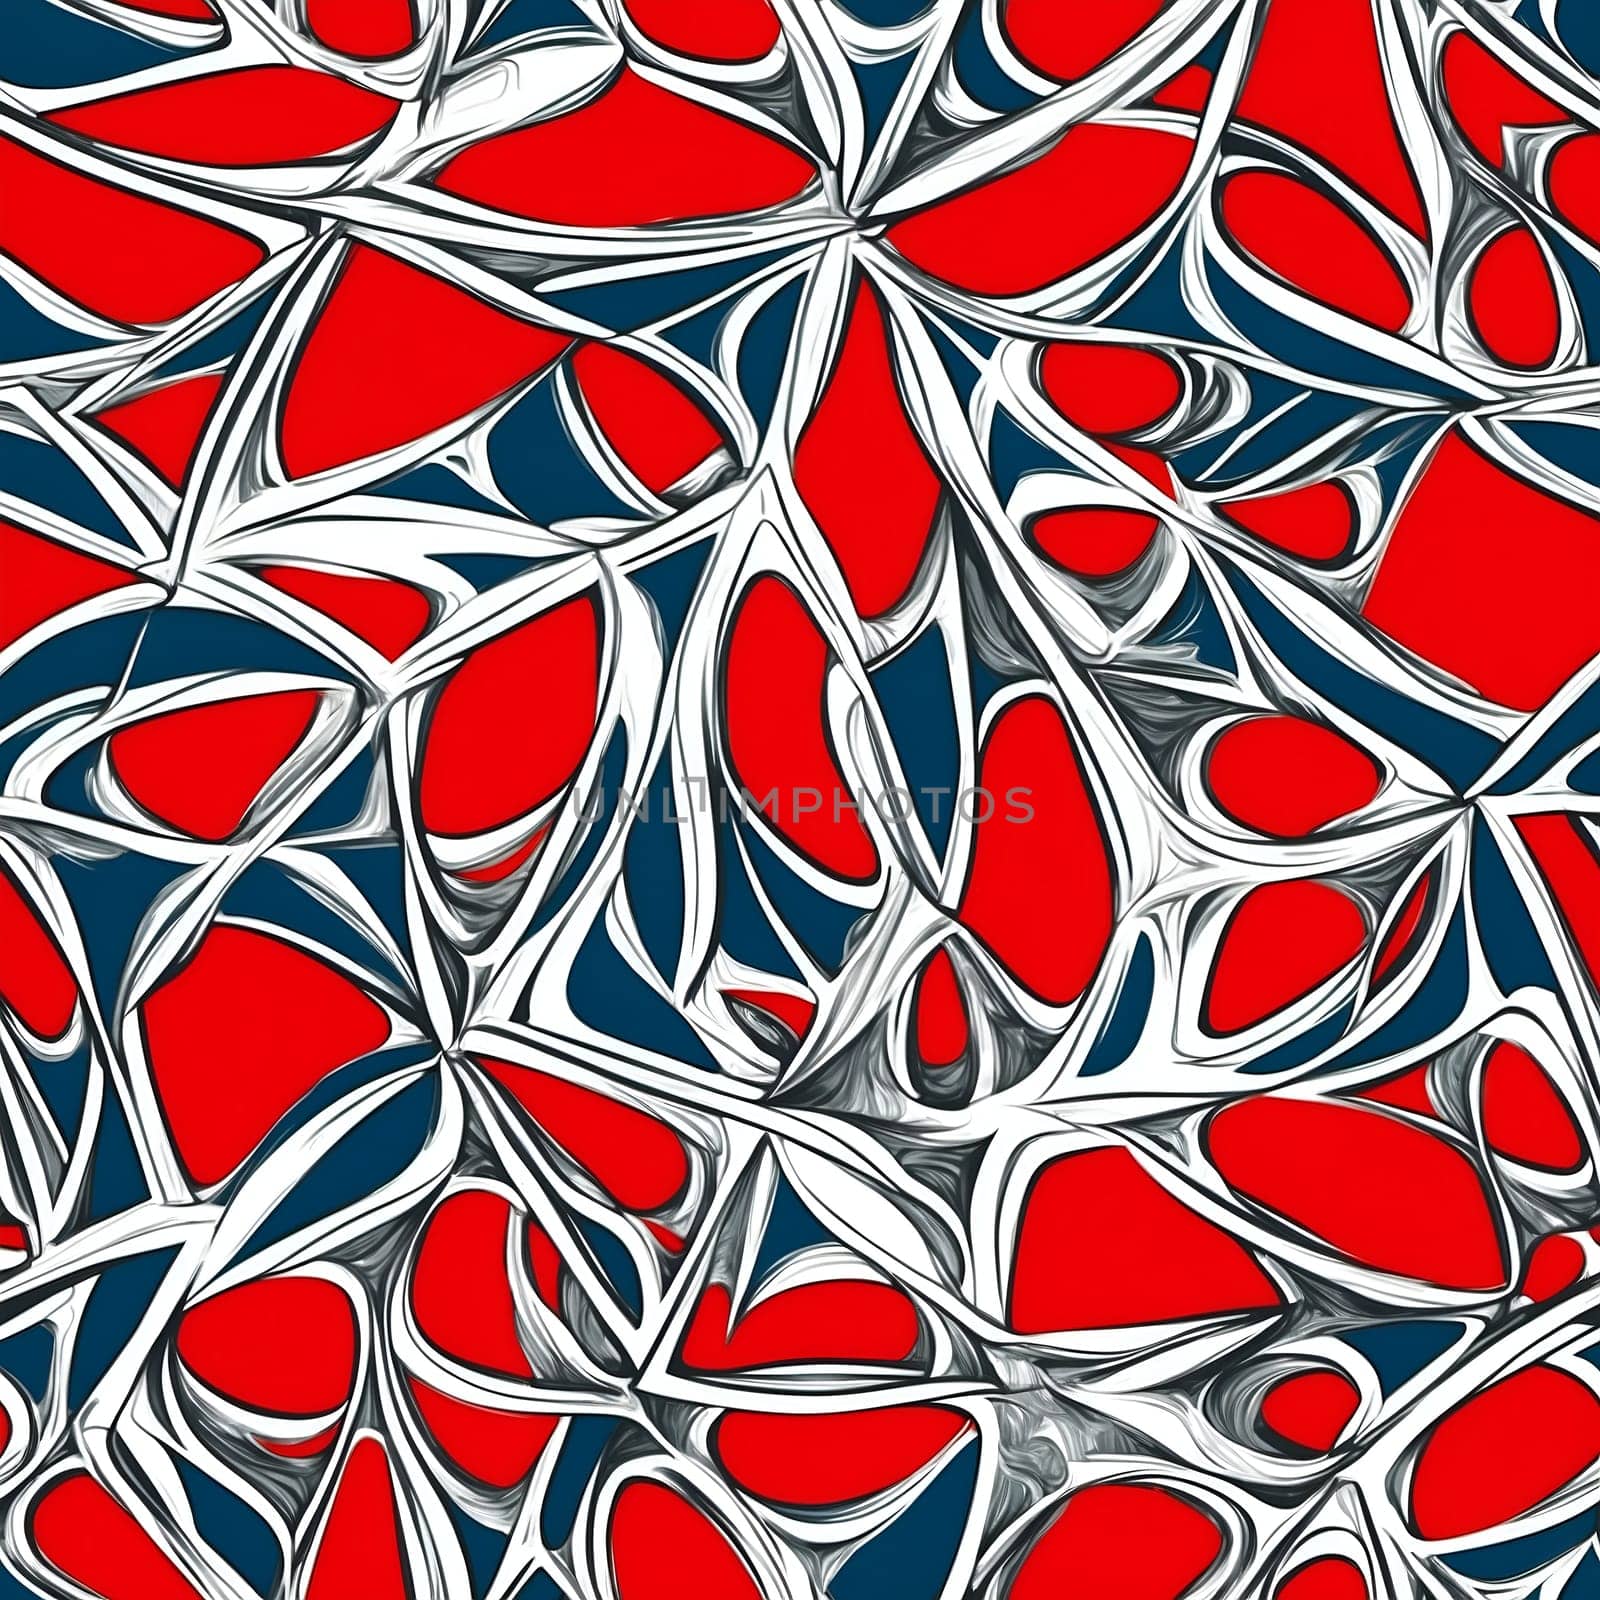 A seamless pattern displaying a vibrant and abstract painting featuring the colors red, white, and blue.